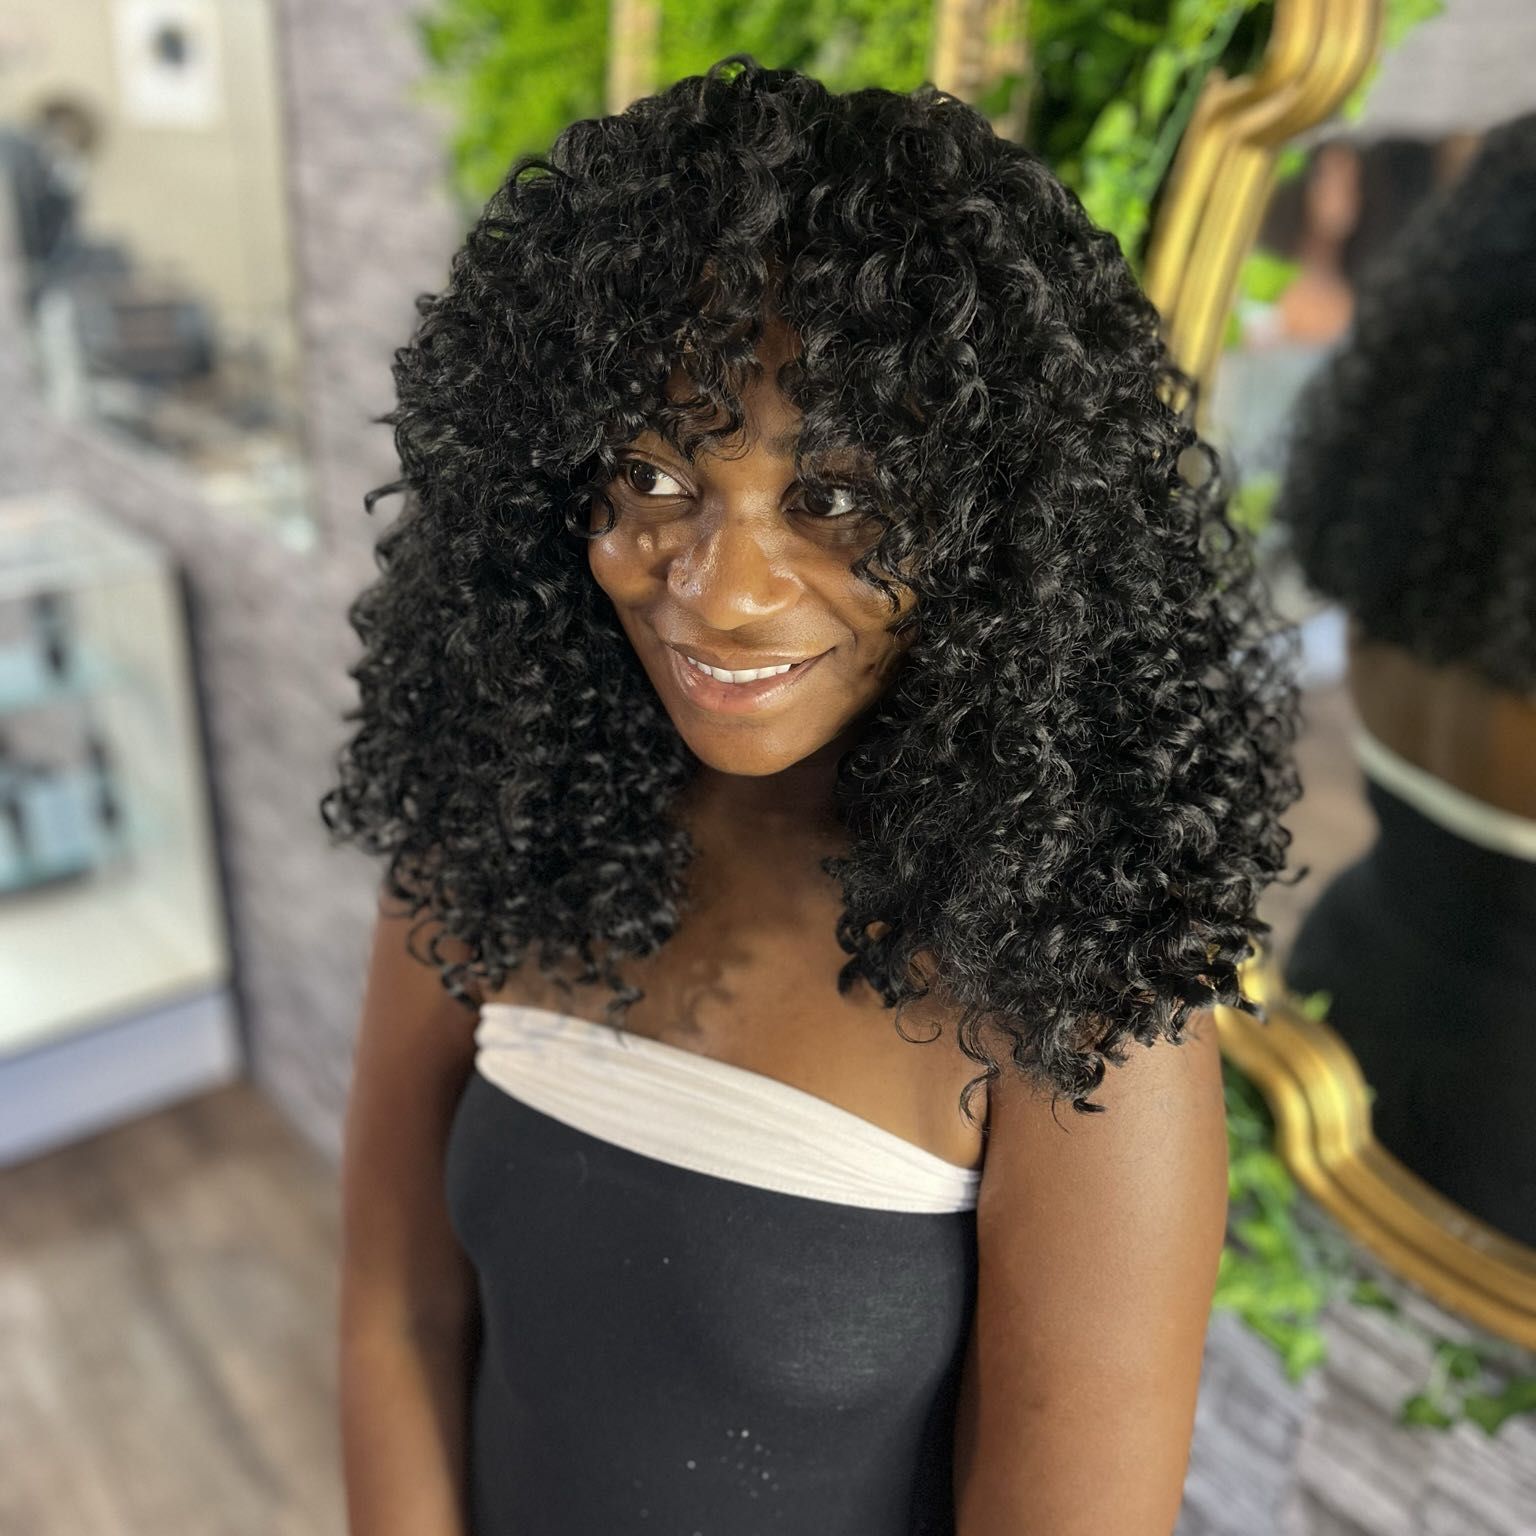 Crochet install full service with curly hair portfolio